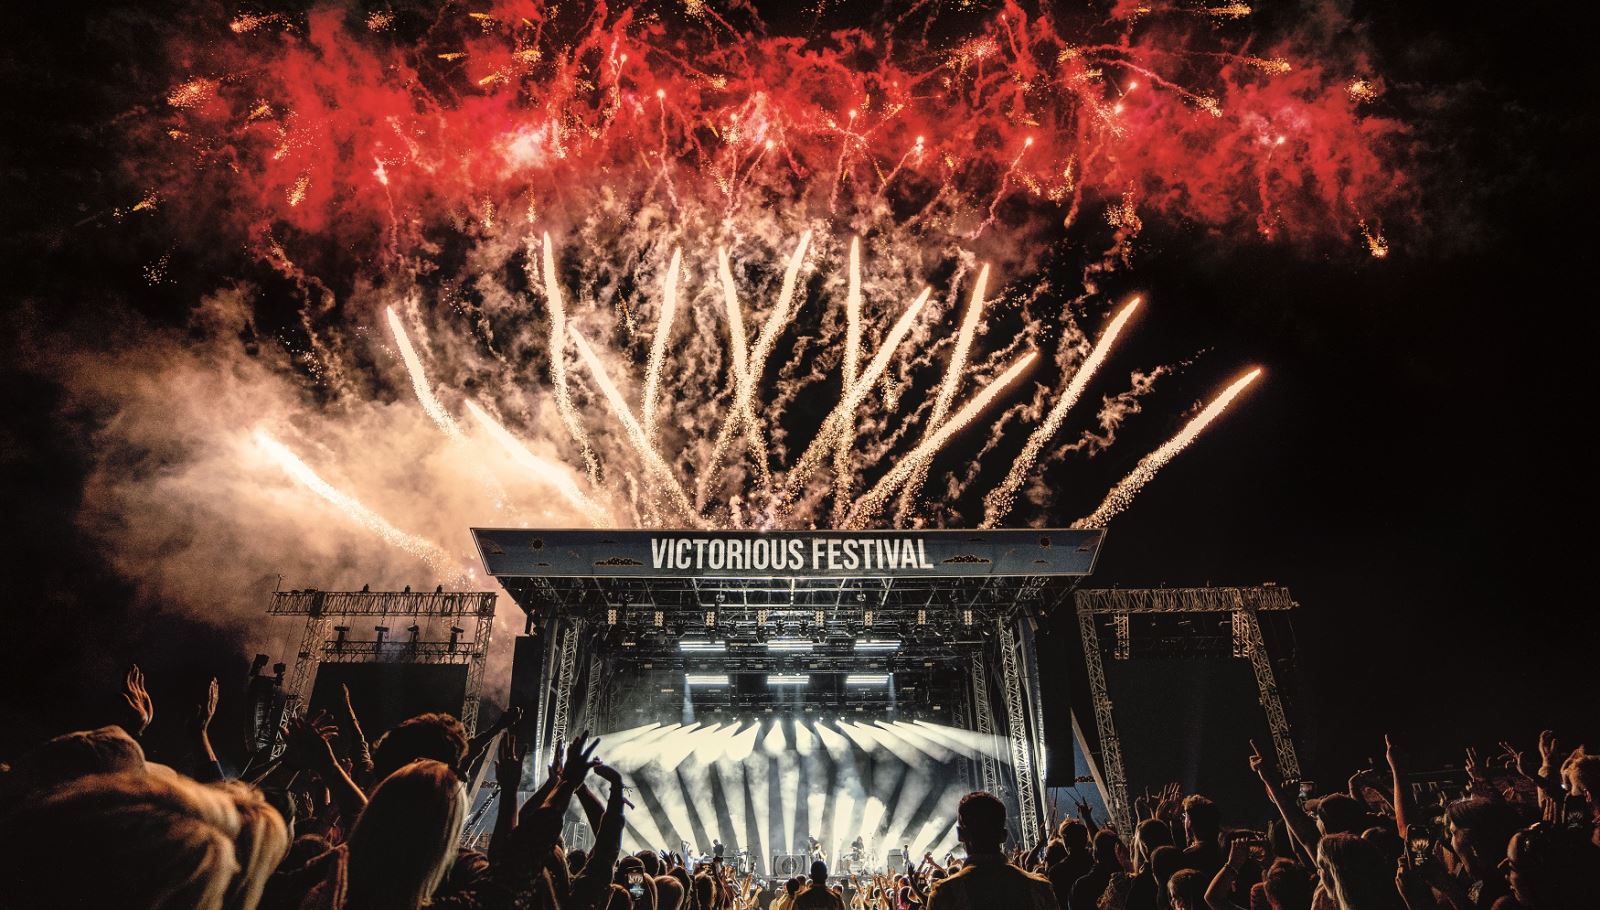 Red fireworks pop over the Common Stage at Victorious Festival